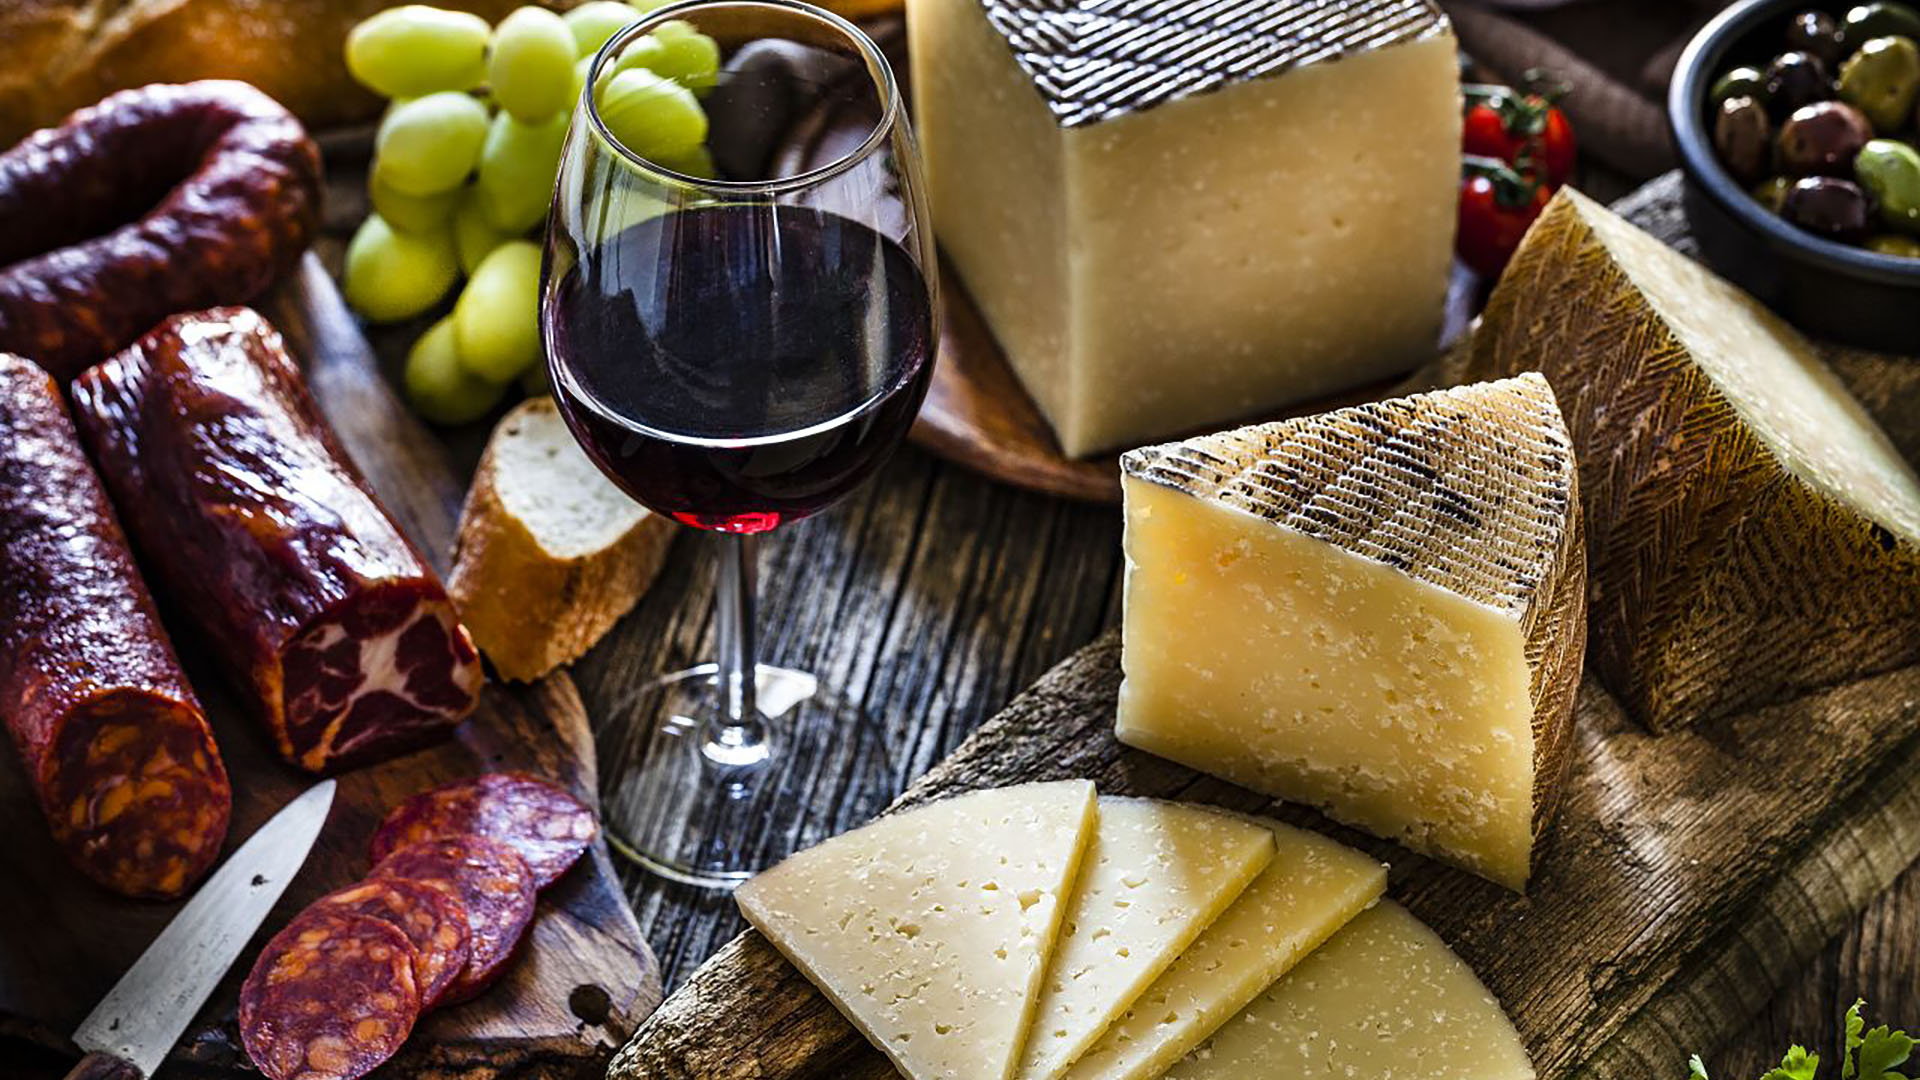 How to pair wine and cheese